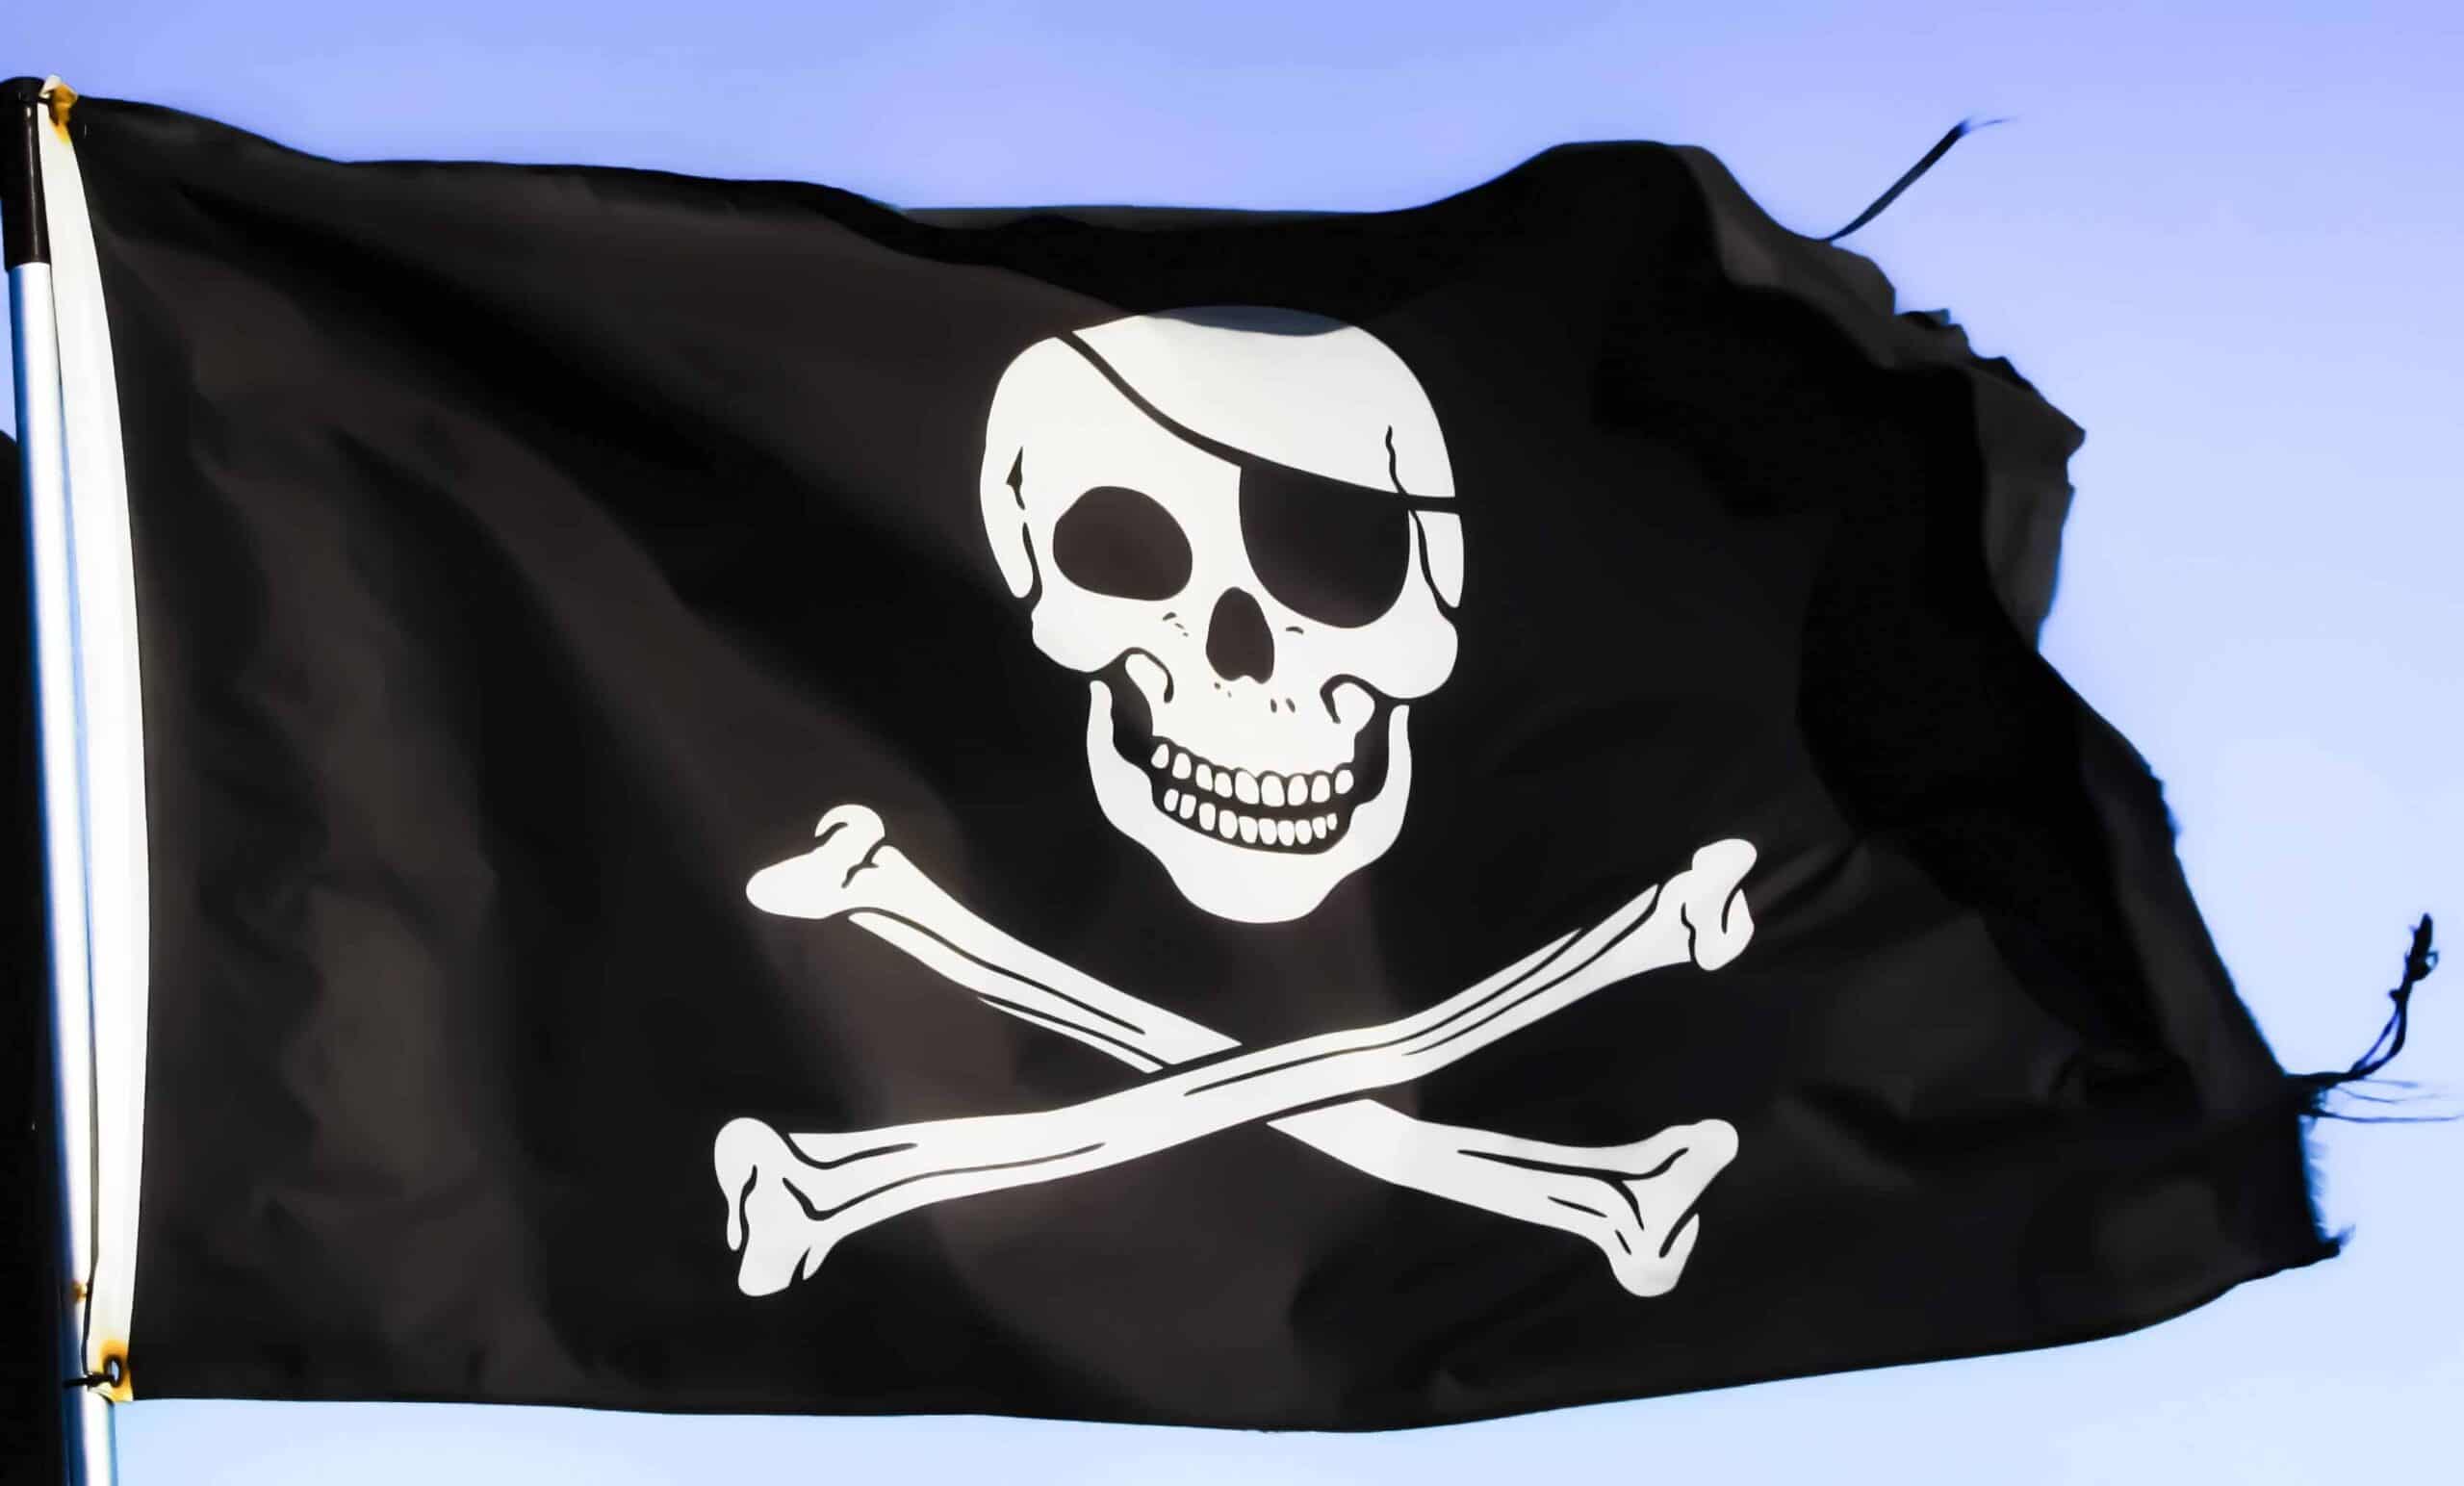 The Pirate Bay blocked in the Netherlands (but you can still